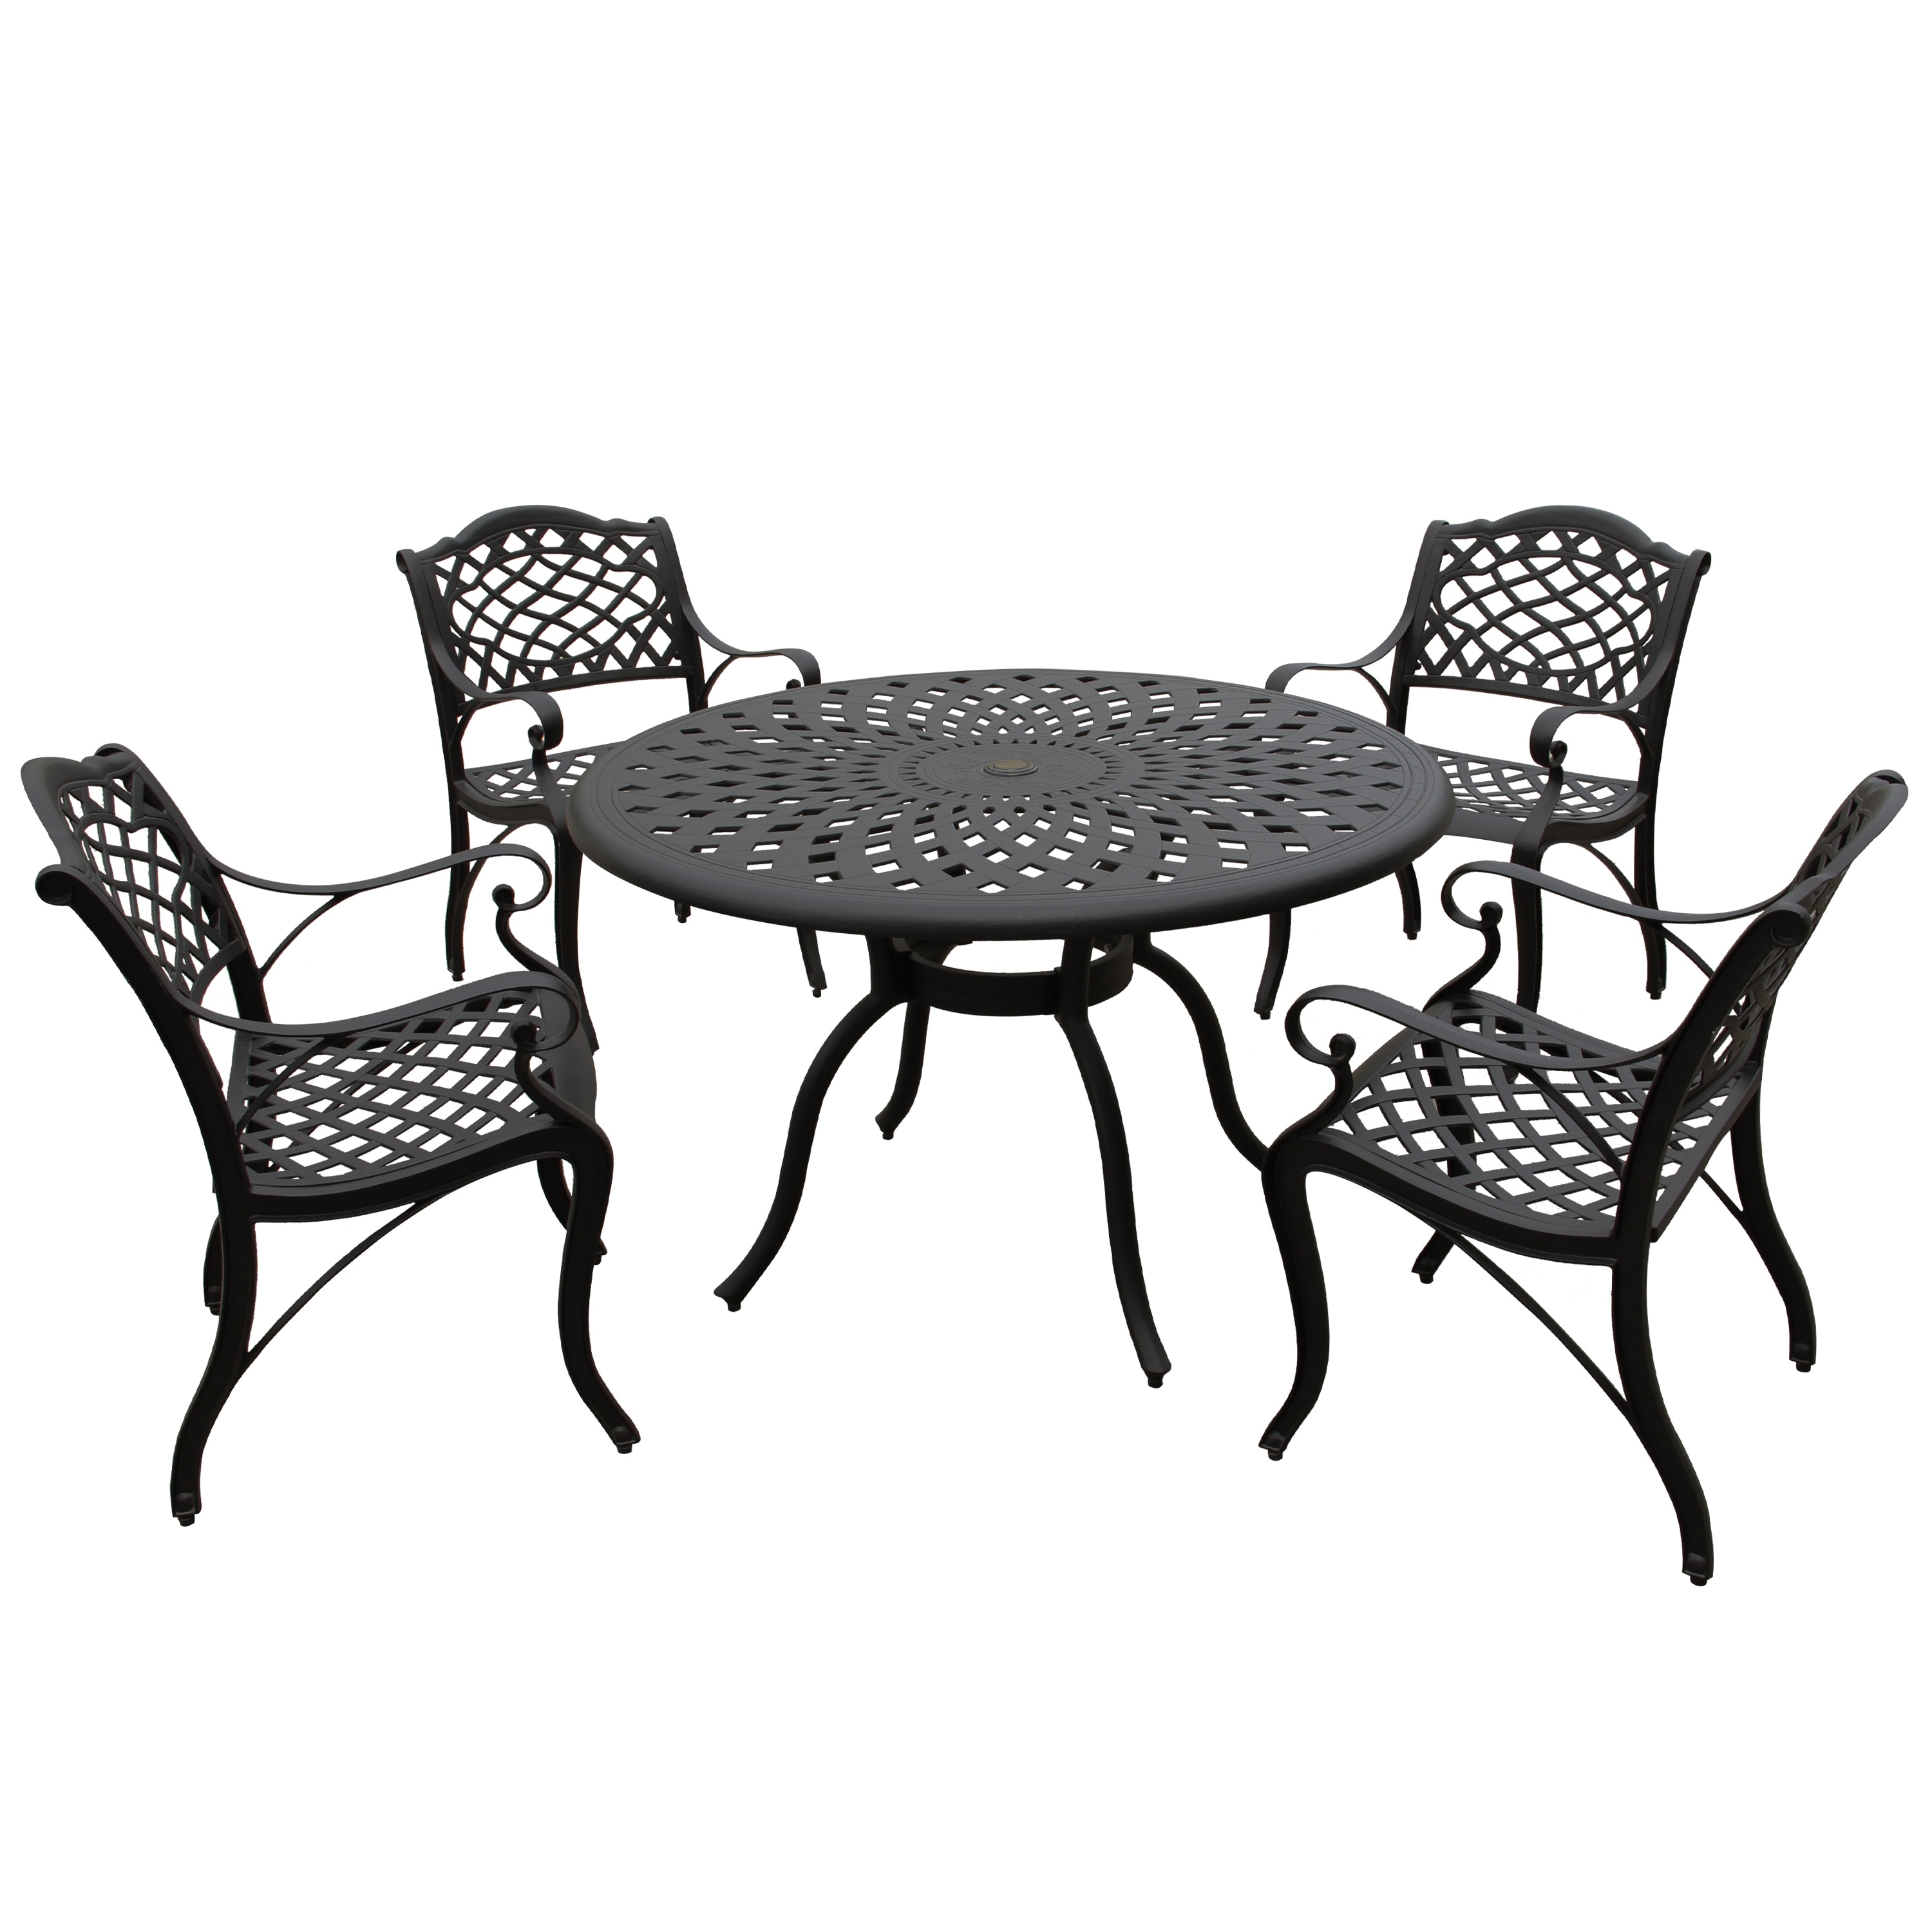 Modern Ornate Outdoor Mesh Aluminum 48-in Round Patio Dining Set With Four Chairs - N/a